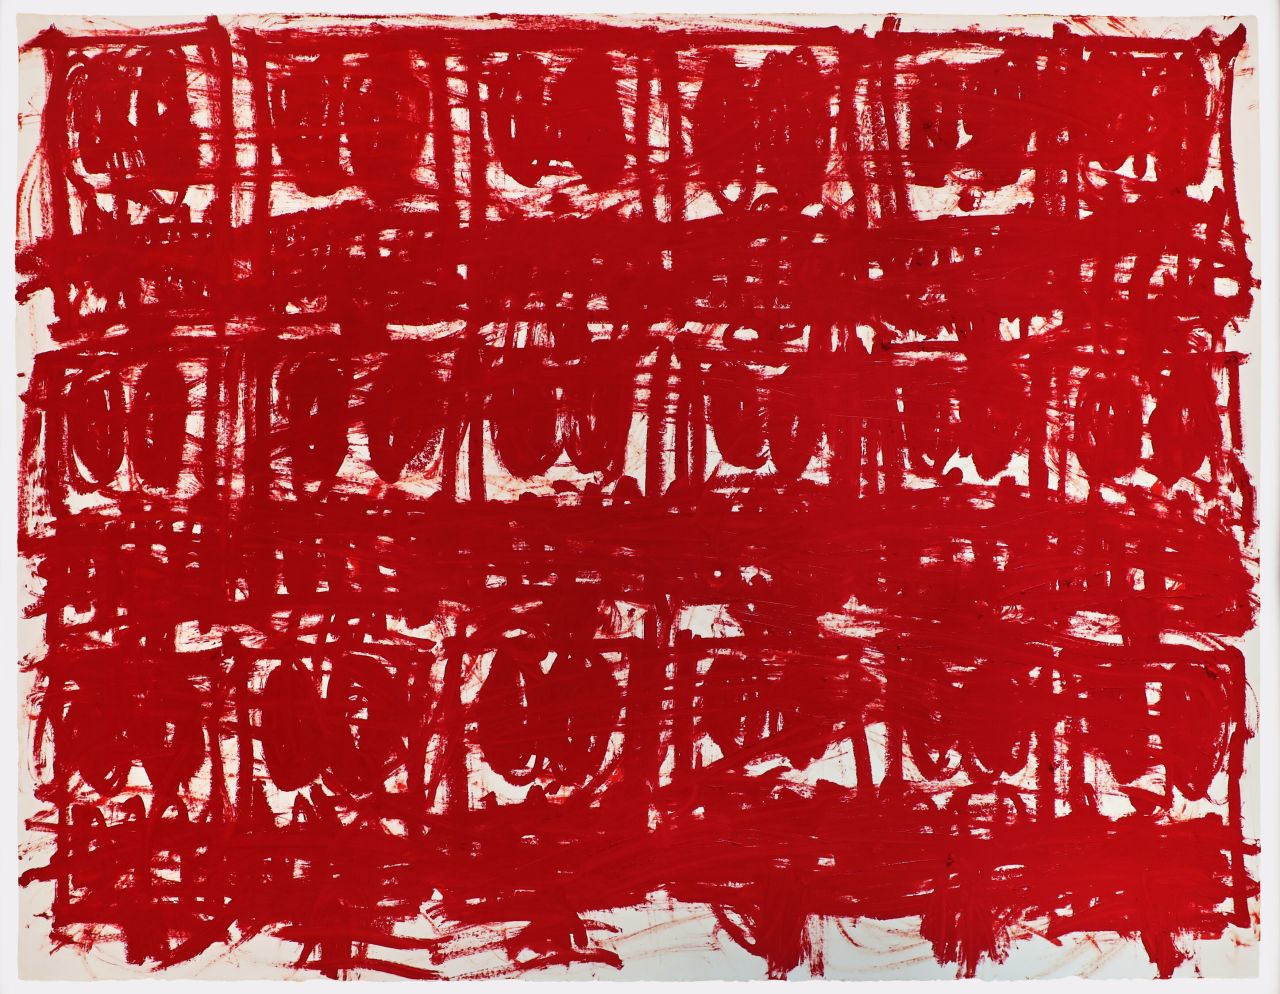 Johnson's new series "Untiled Anxious Red Drawings," is bold red to express urgency and alarm.